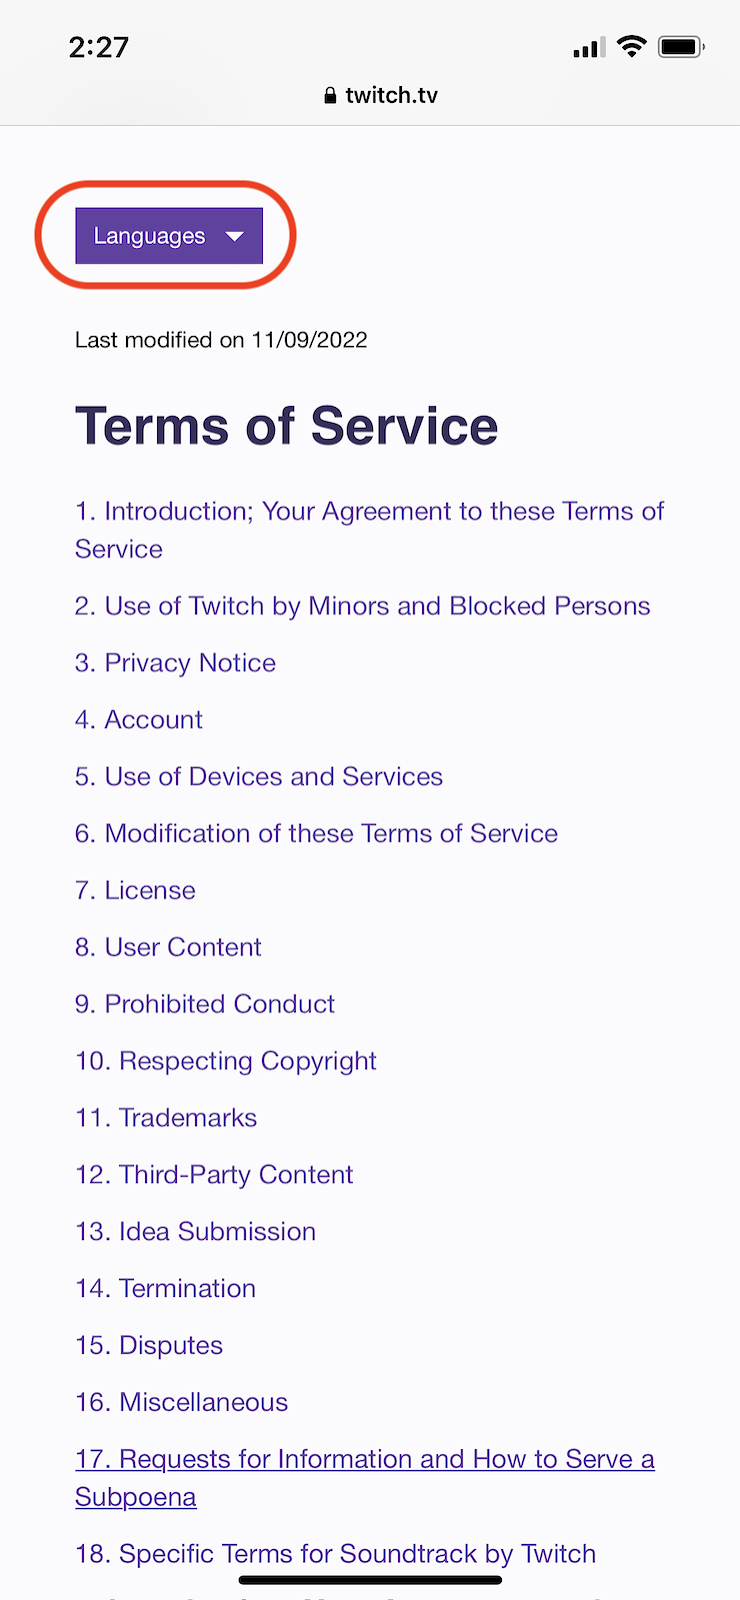 Twitch-terms-of-service-policy-organized-easy-to-navigate